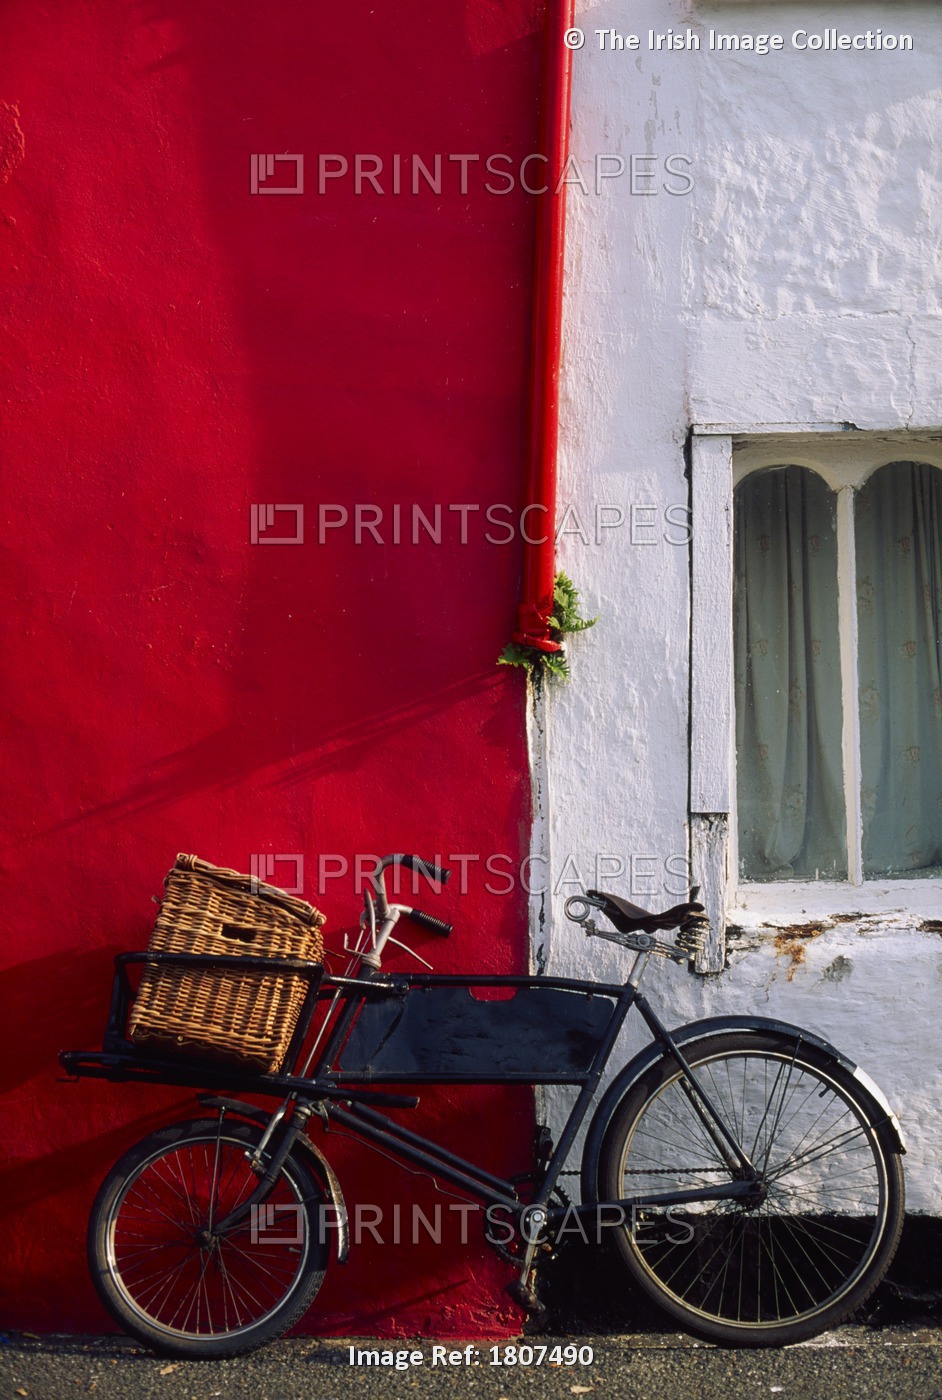 Kinsale, Co Cork, Ireland; Bicycle Parked In Front Of A Building